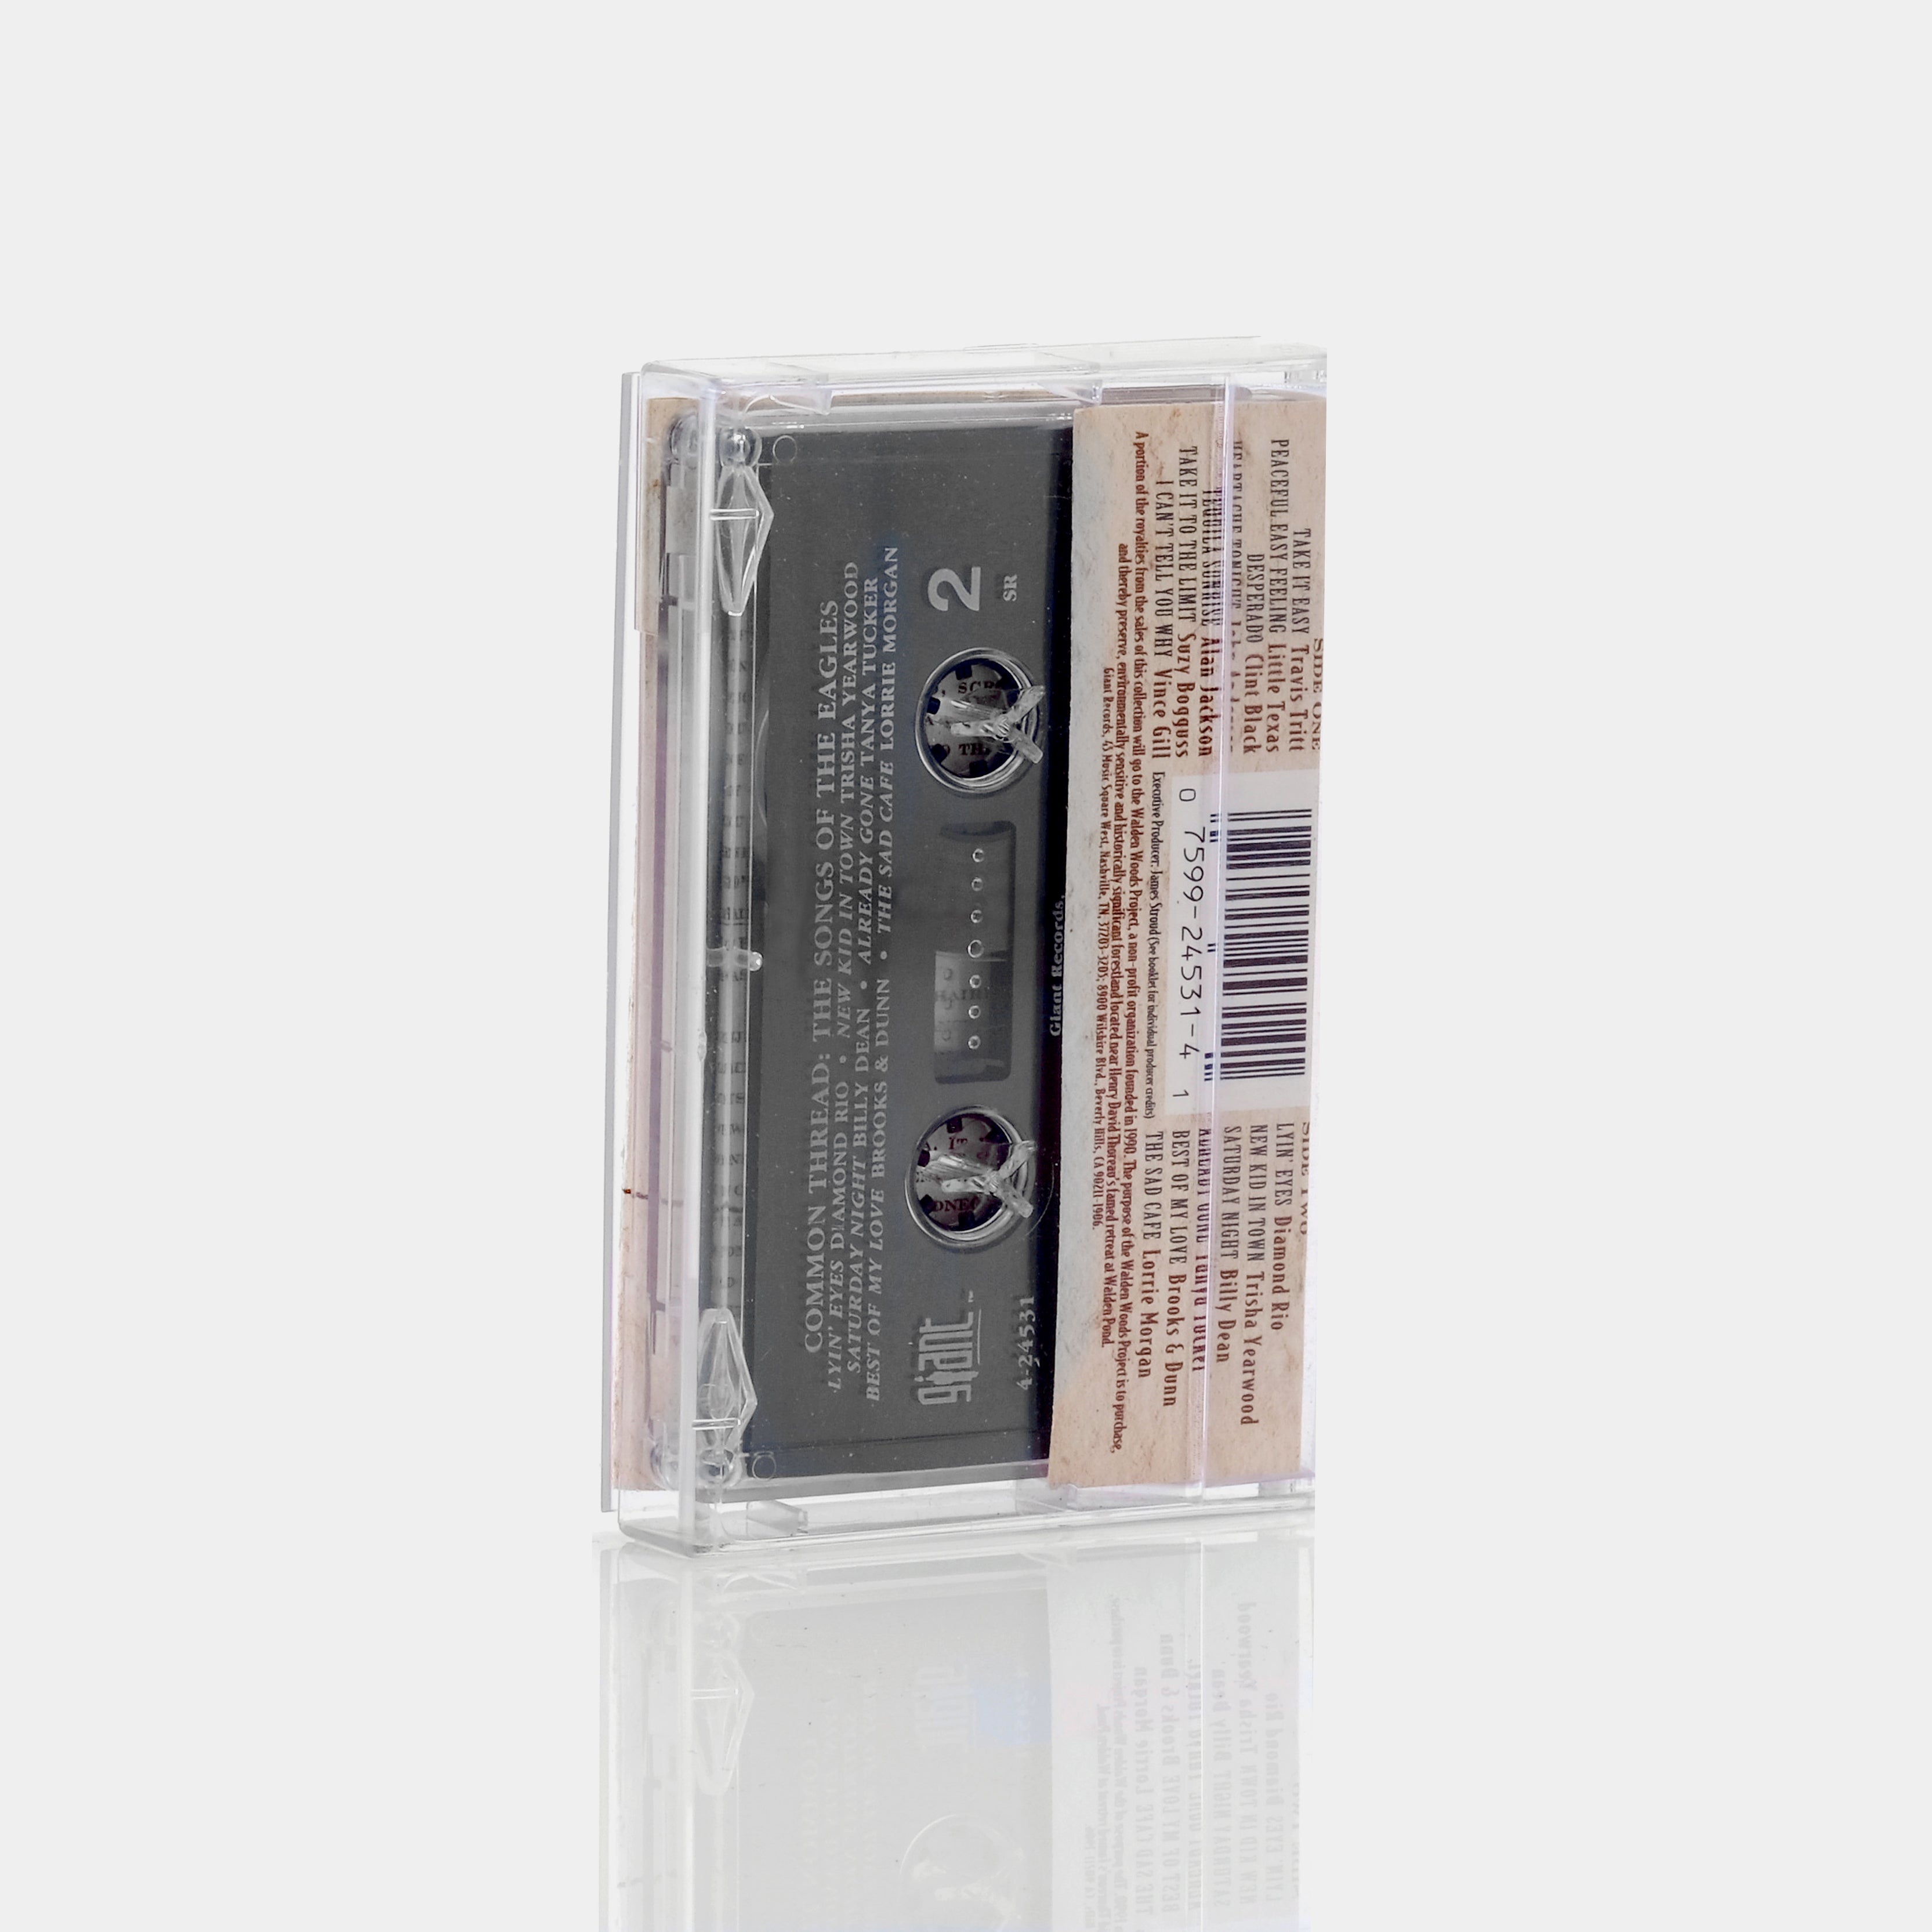 Common Thread: The Songs Of The Eagles Cassette Tape